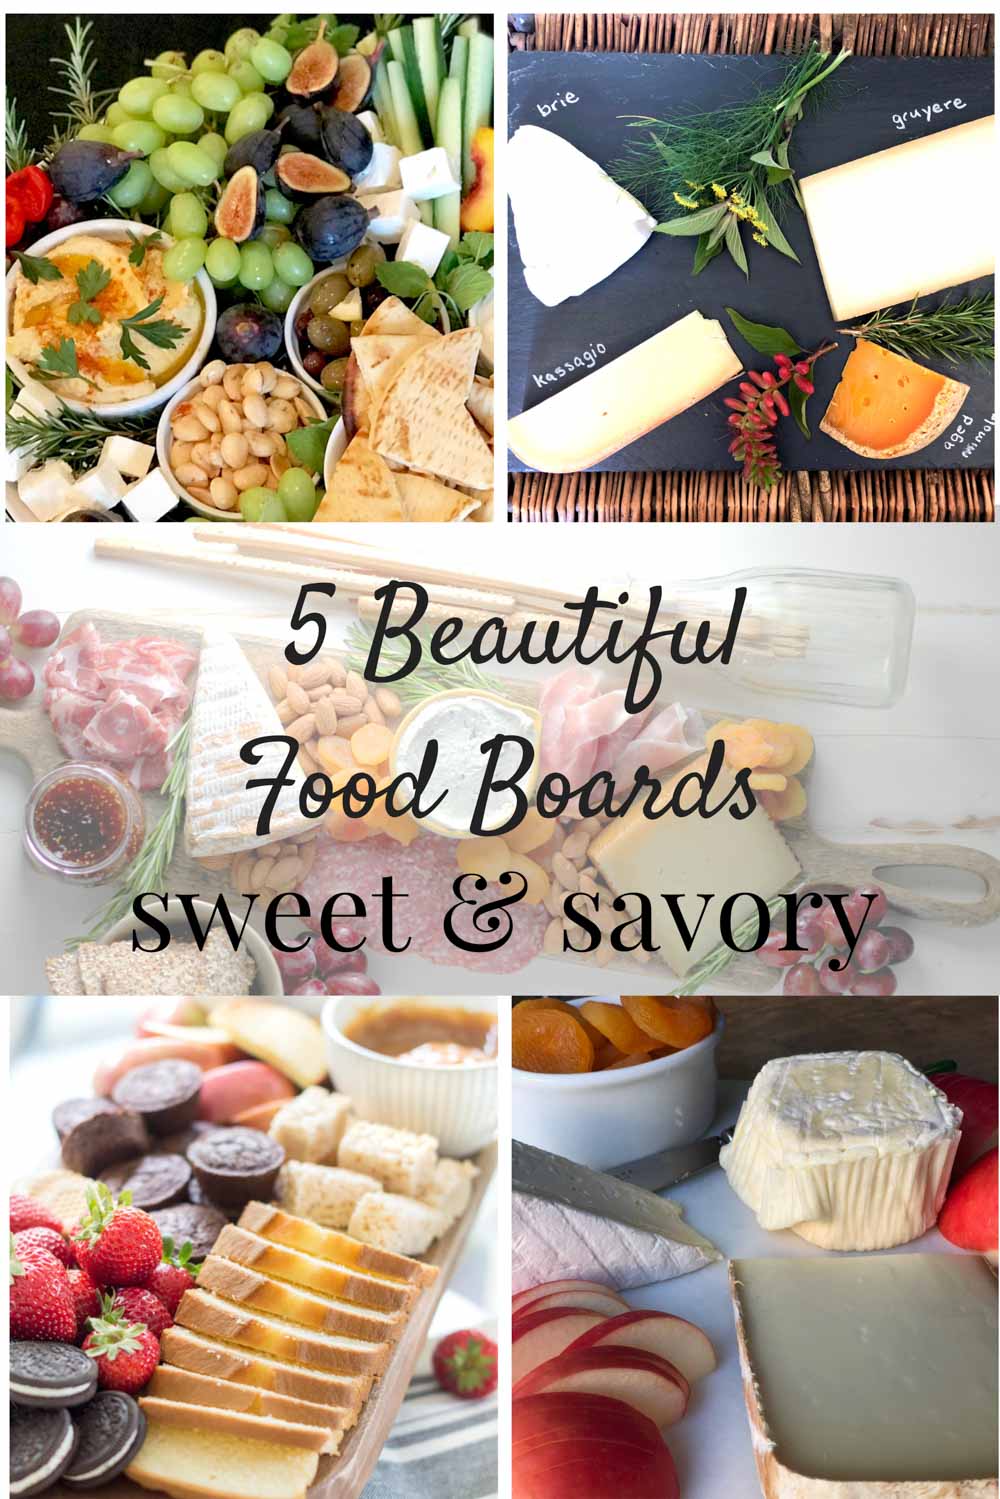 Ideas for Platters and Food Boards for Parties